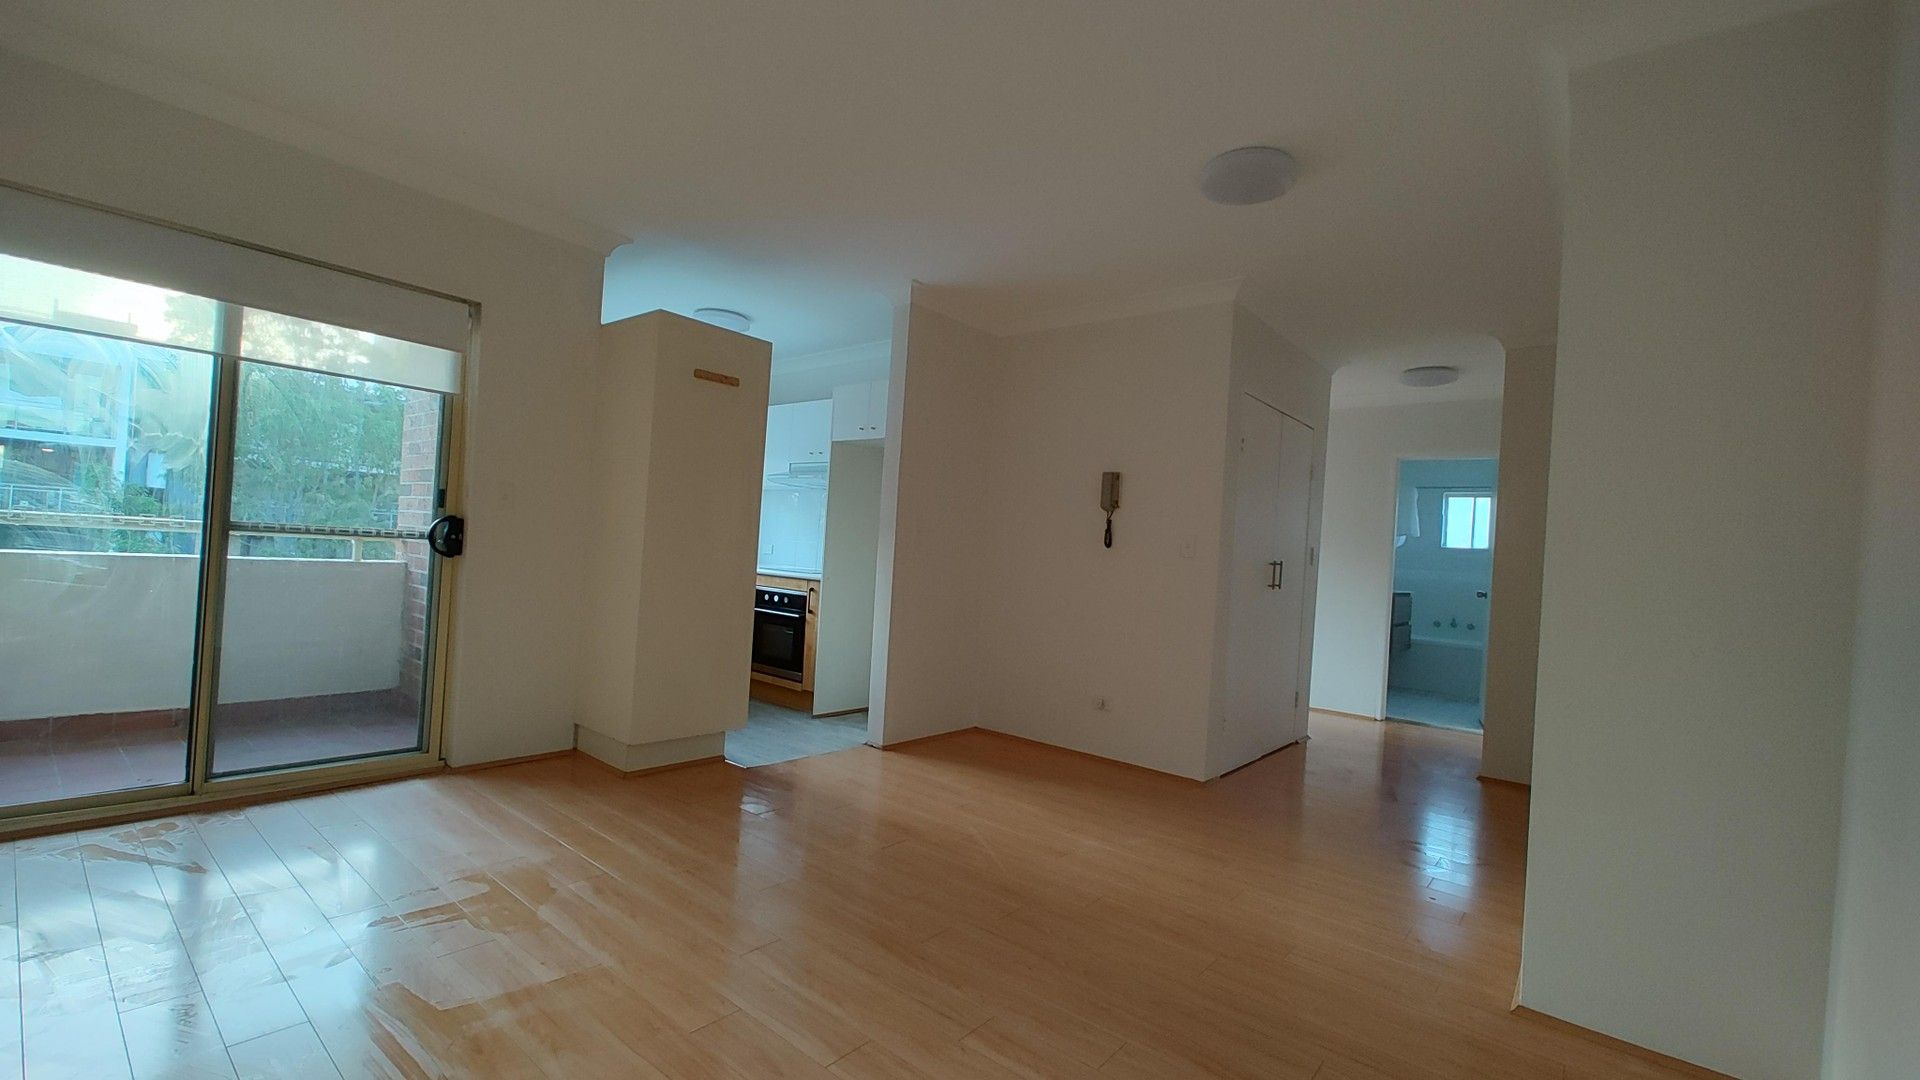 2 bedrooms Apartment / Unit / Flat in 24/11 Oxford Street BLACKTOWN NSW, 2148